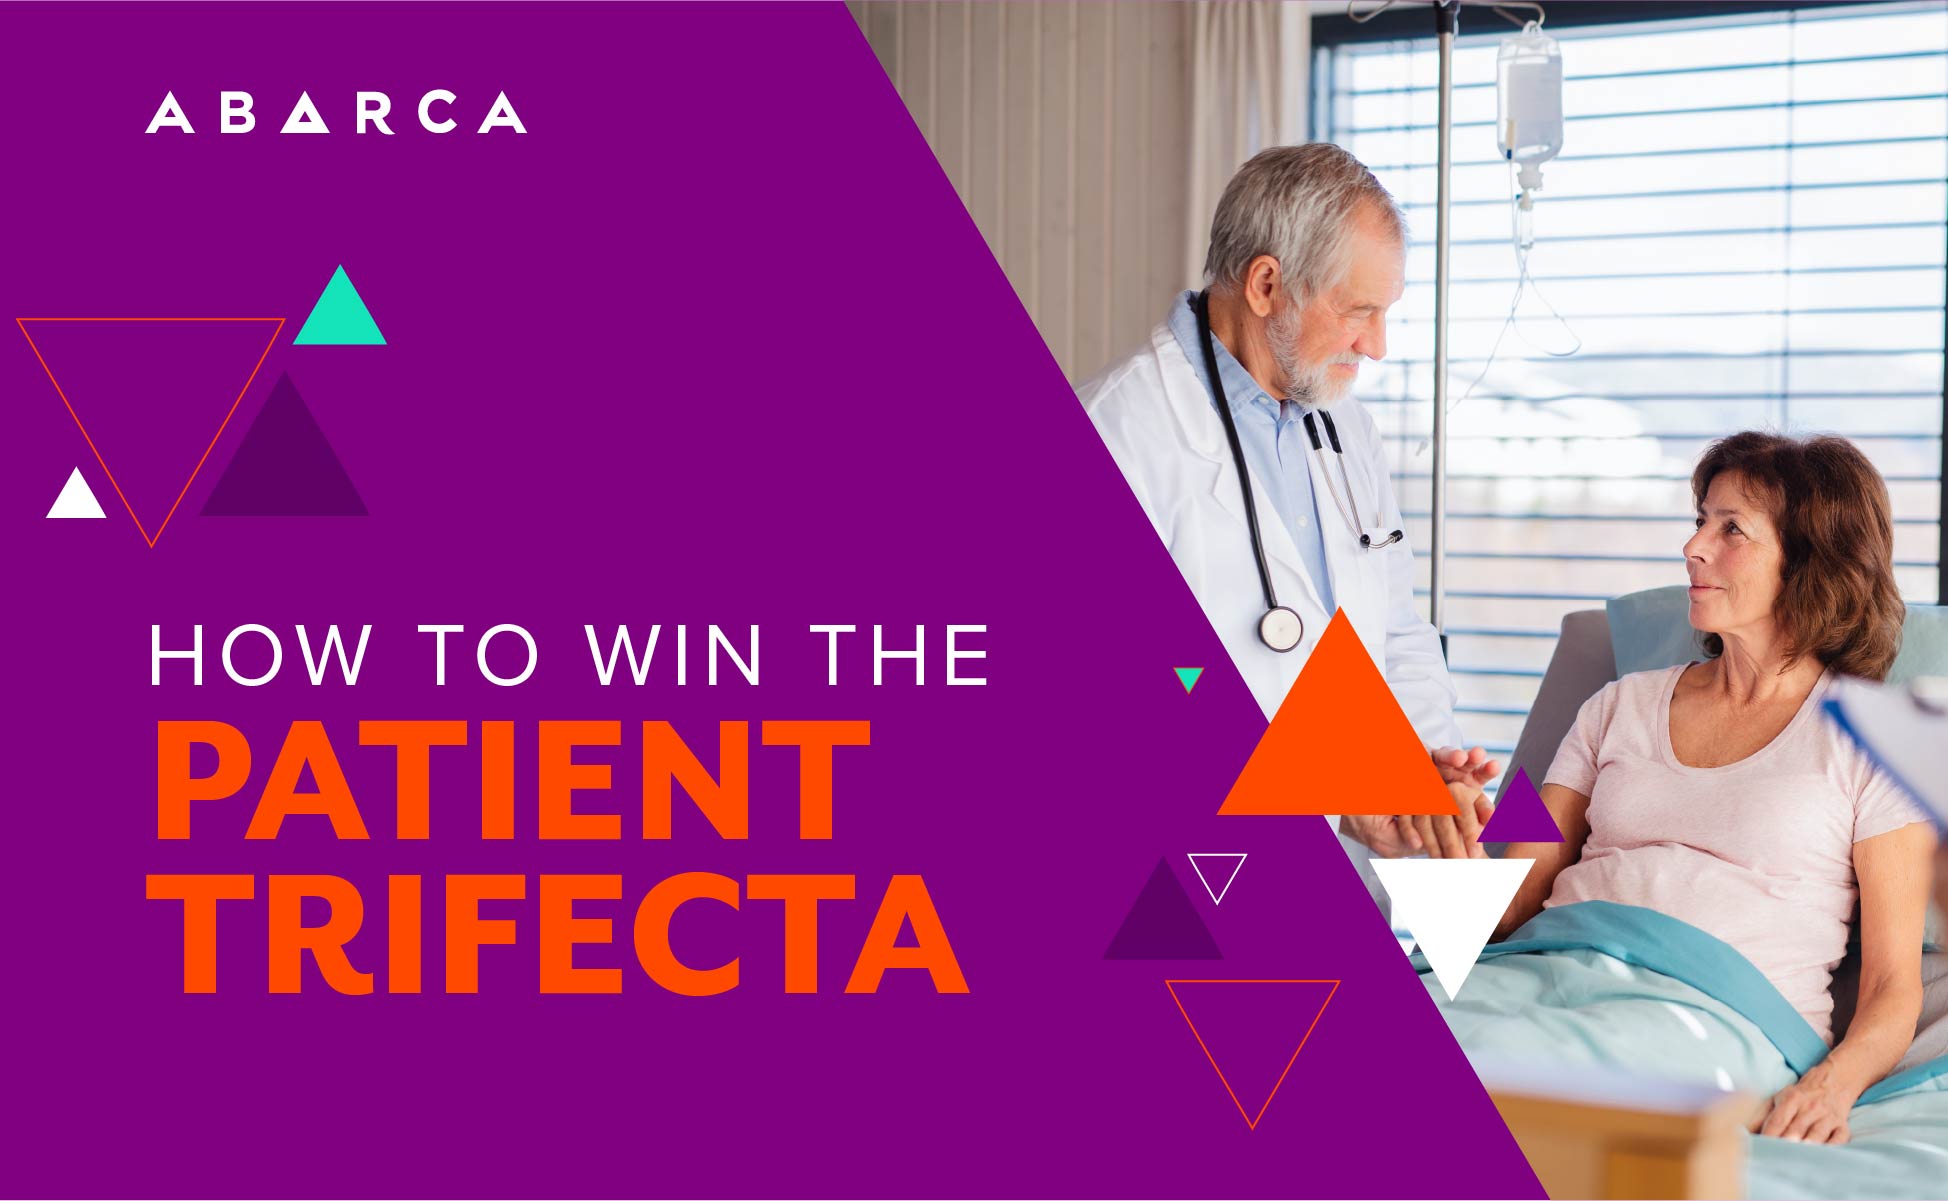 Abarca Health: How to Win the Patient Trifecta